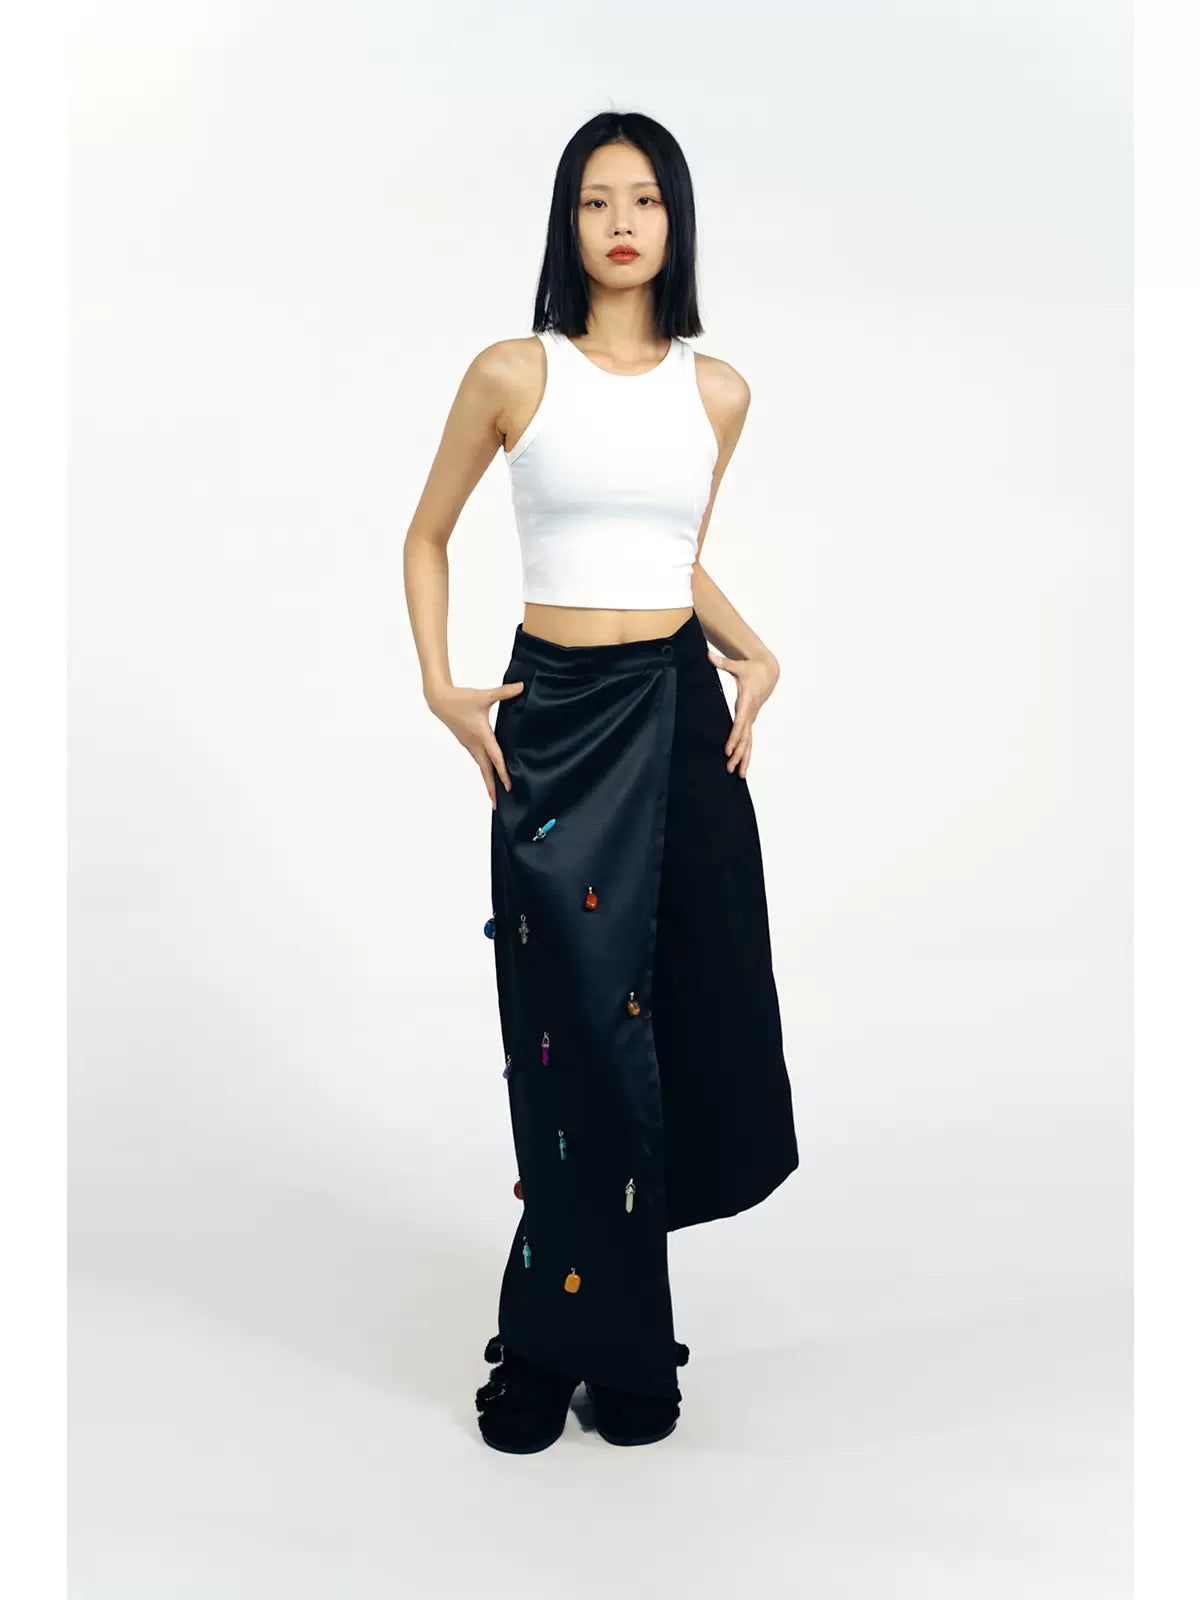 Semi-Gem Wrapped Long Skirt Korean Street Fashion Skirt By Apriority Shop Online at OH Vault